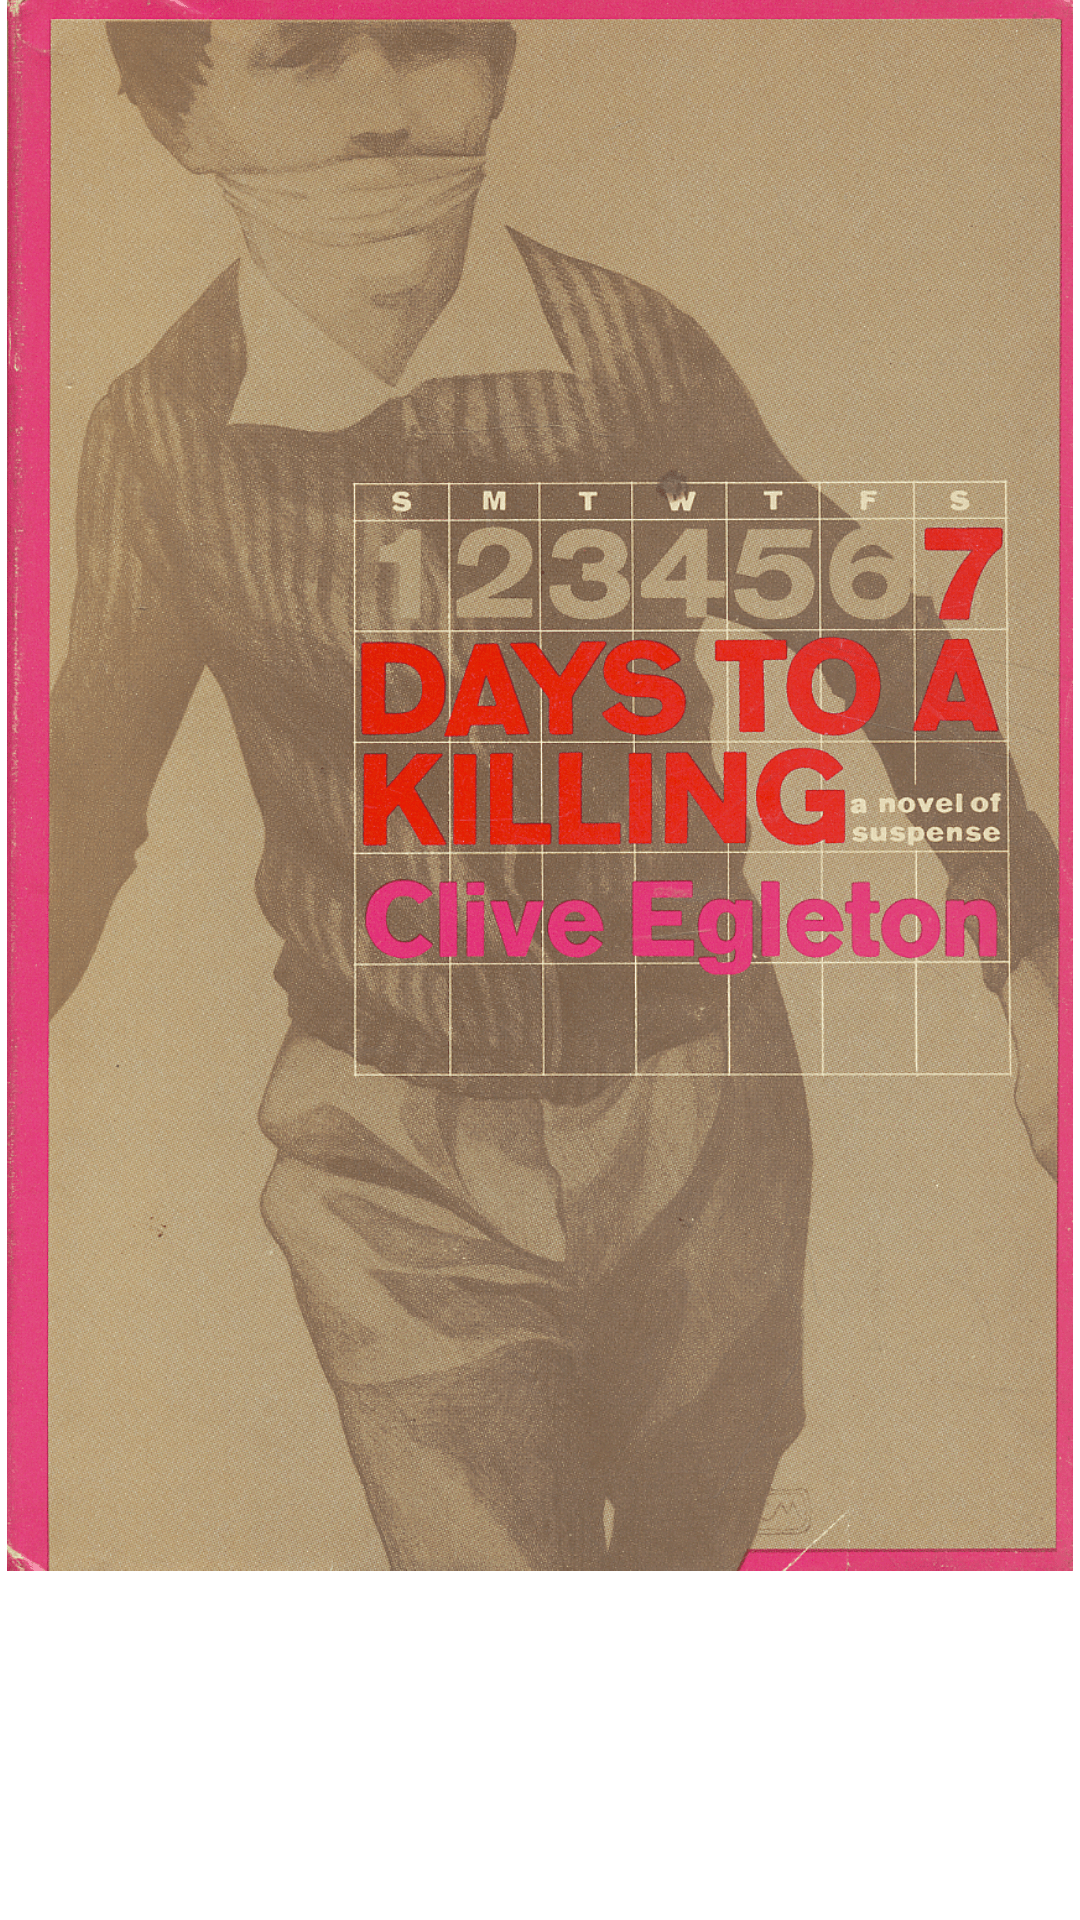 Seven Days to a Killing